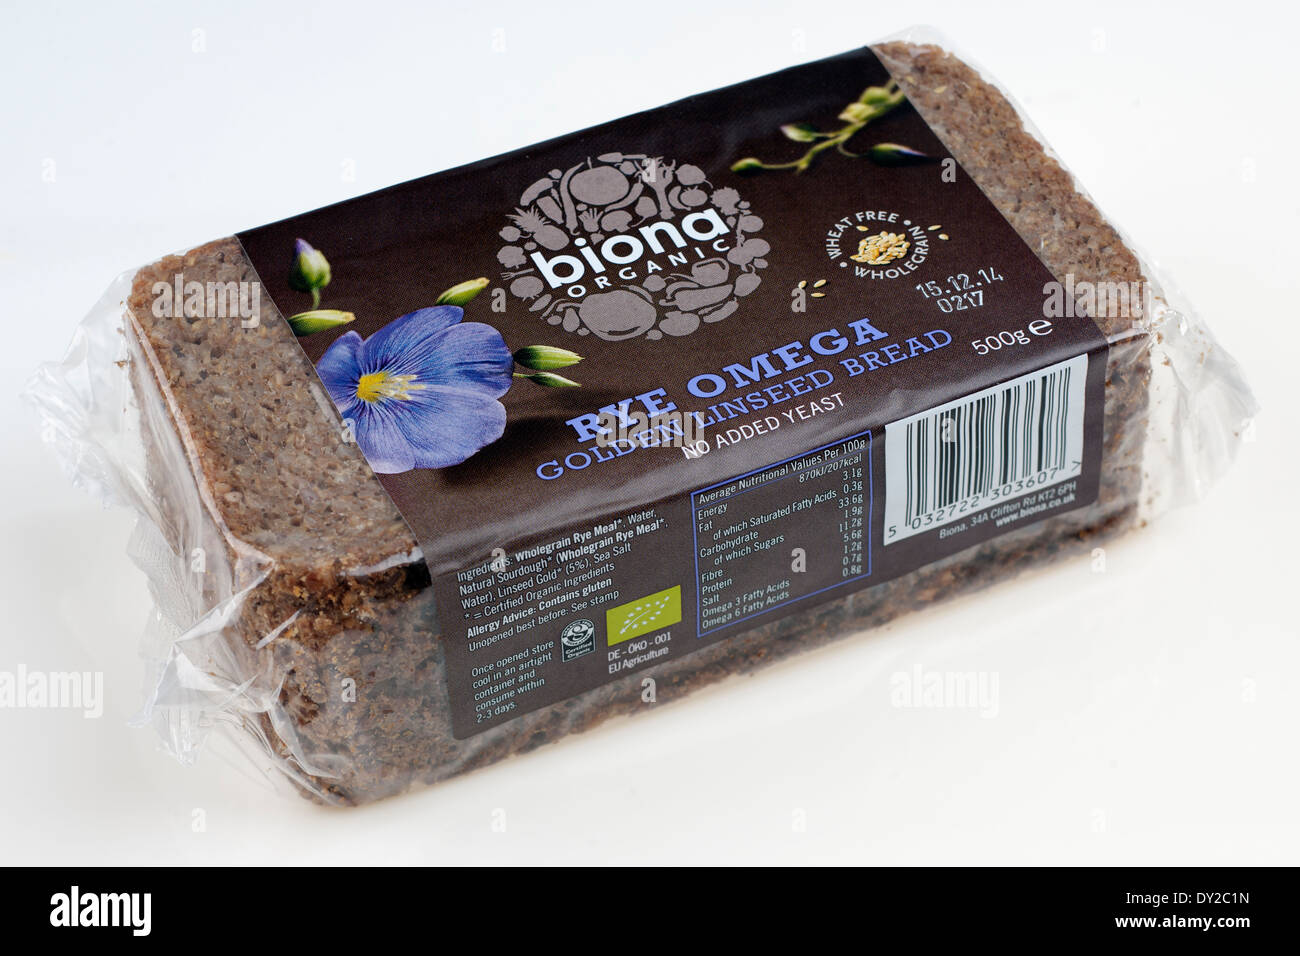 Pack of Biona Rye Omega golden linseed bread with Wolemeal Rye Stock Photo